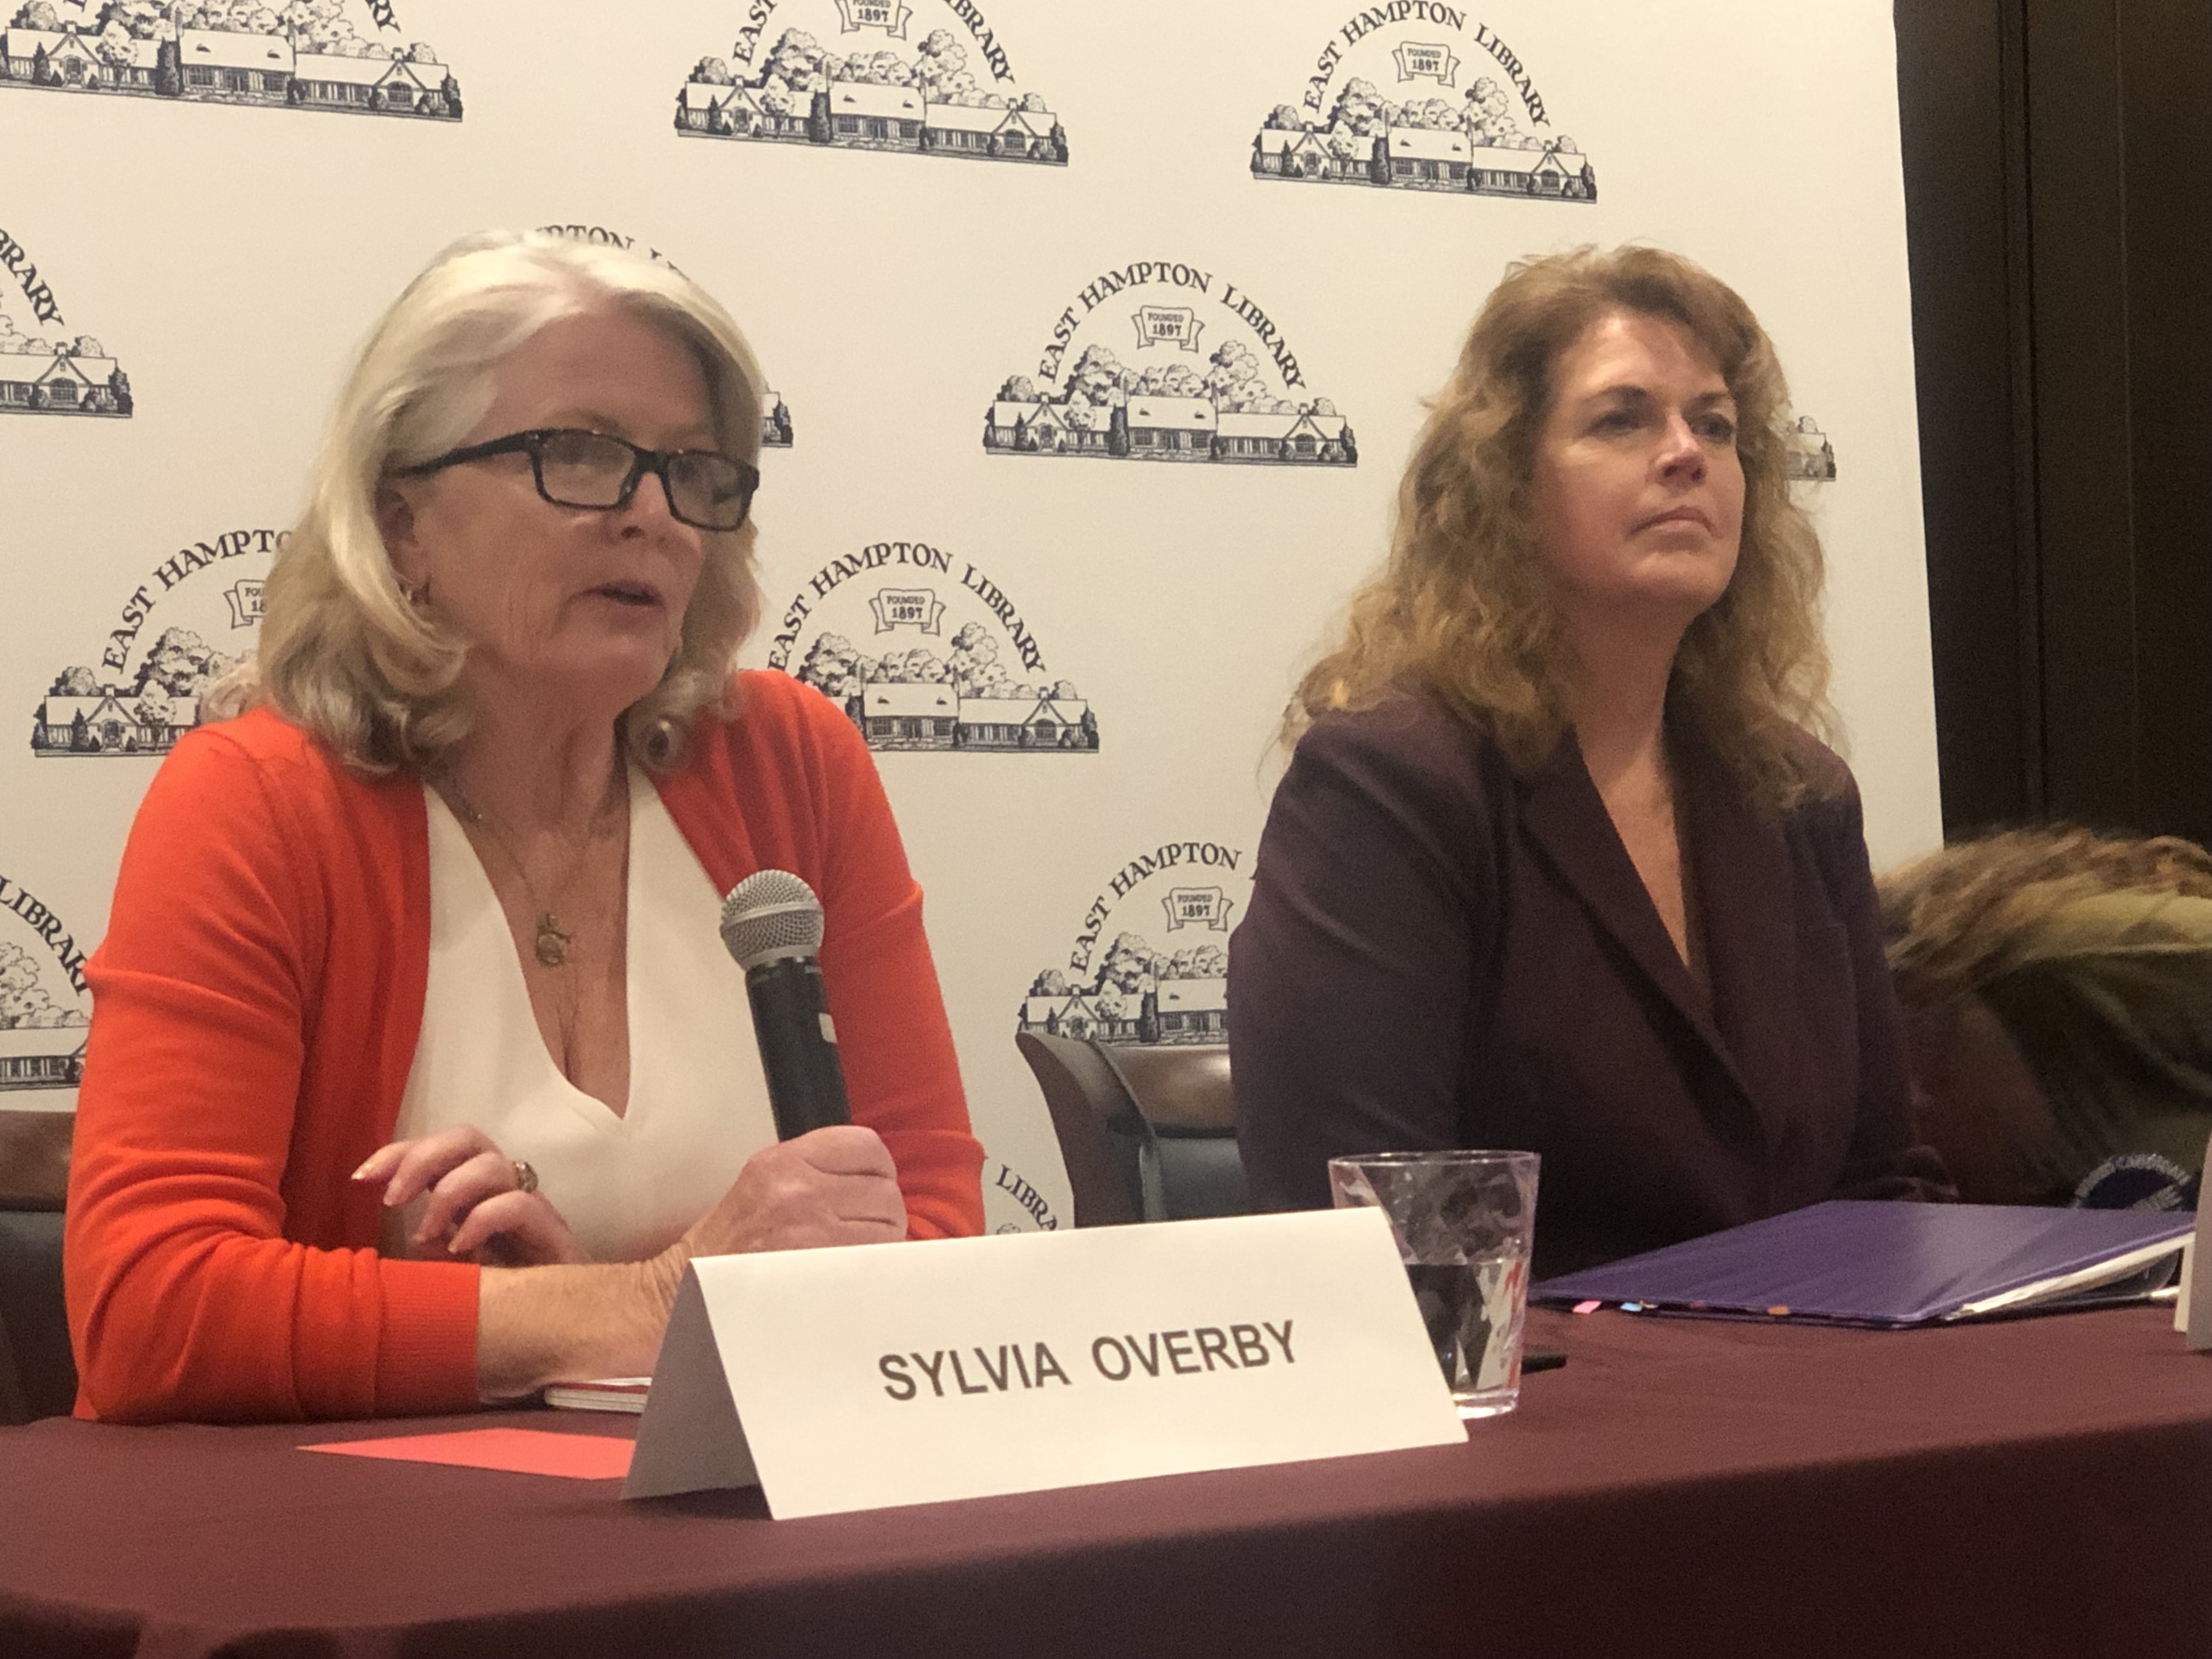 Sylvia Overby, left, and Elizabeth Bambrick at the League of Women Voters debate on Wednesday night in East Hampton.